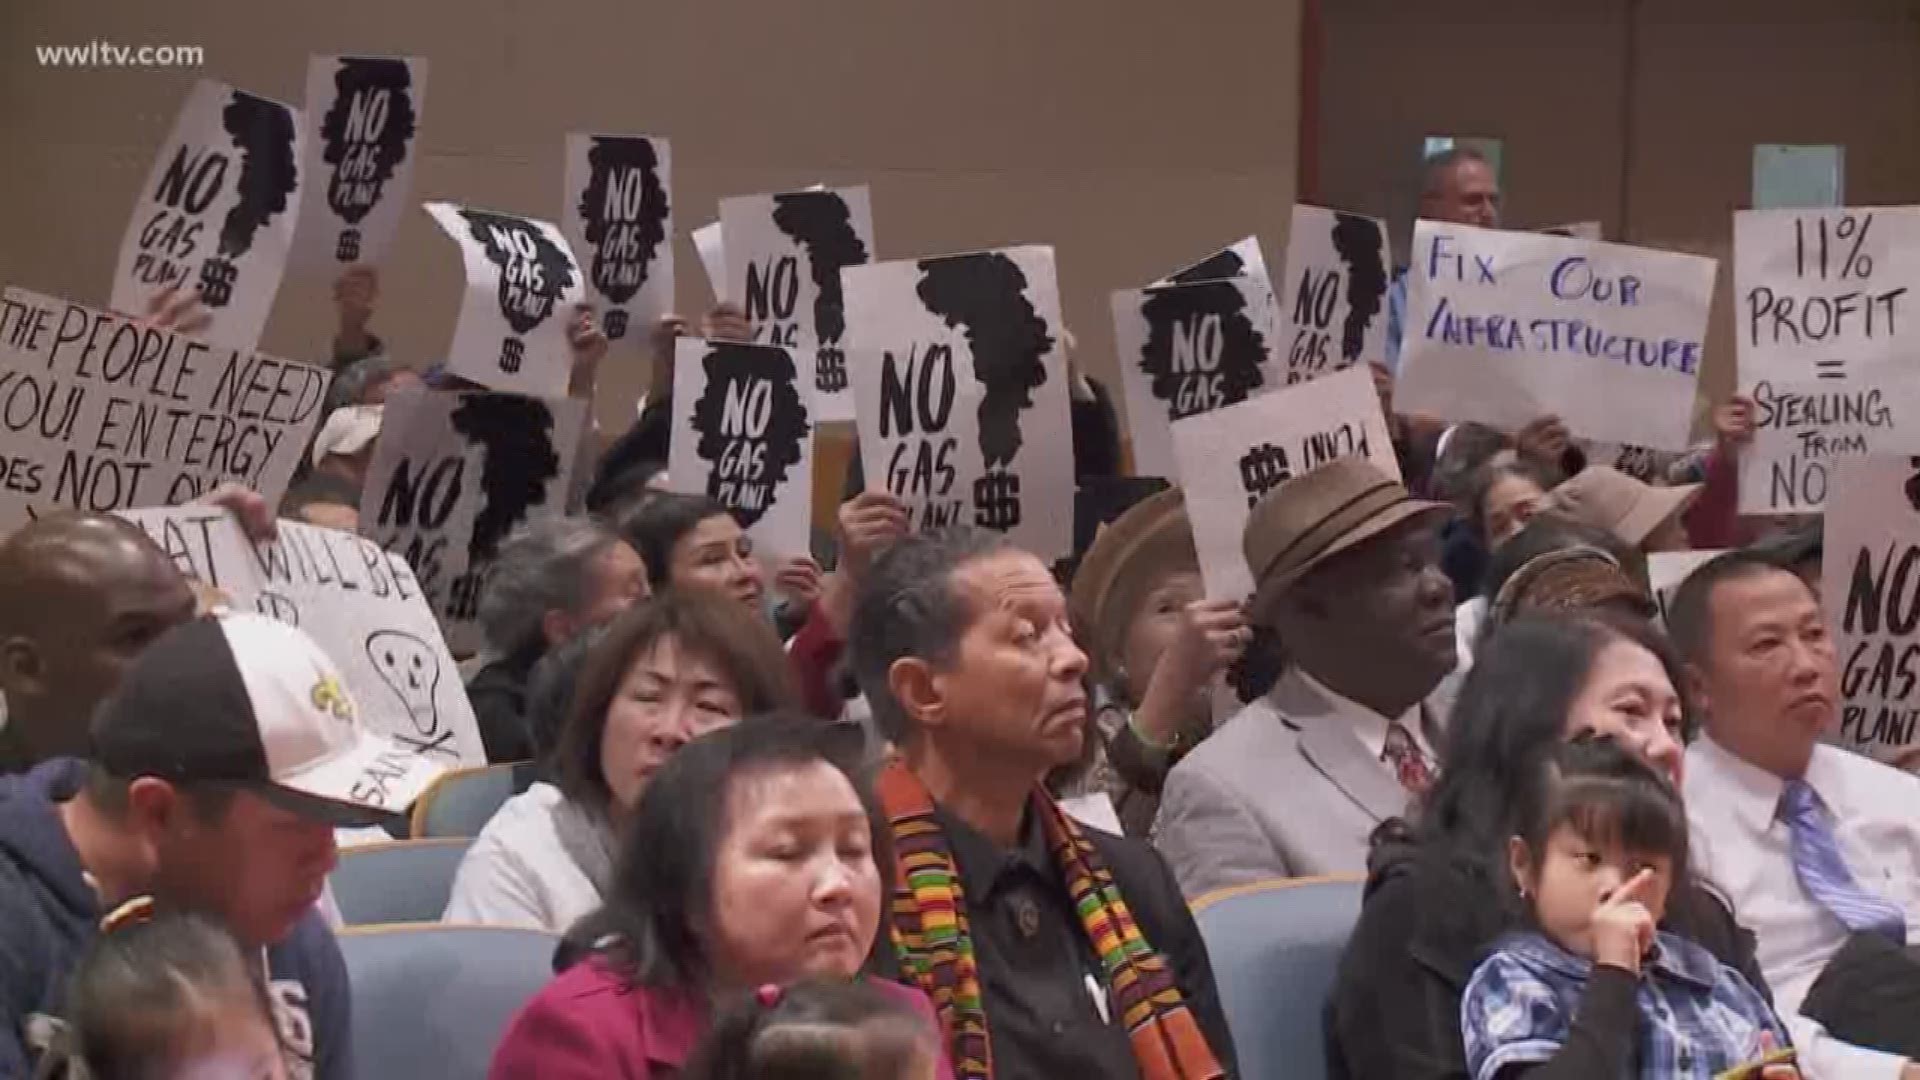 The New Orleans city council voted 6-1 to approve a controversial Entergy gas plant in New Orleans East. 